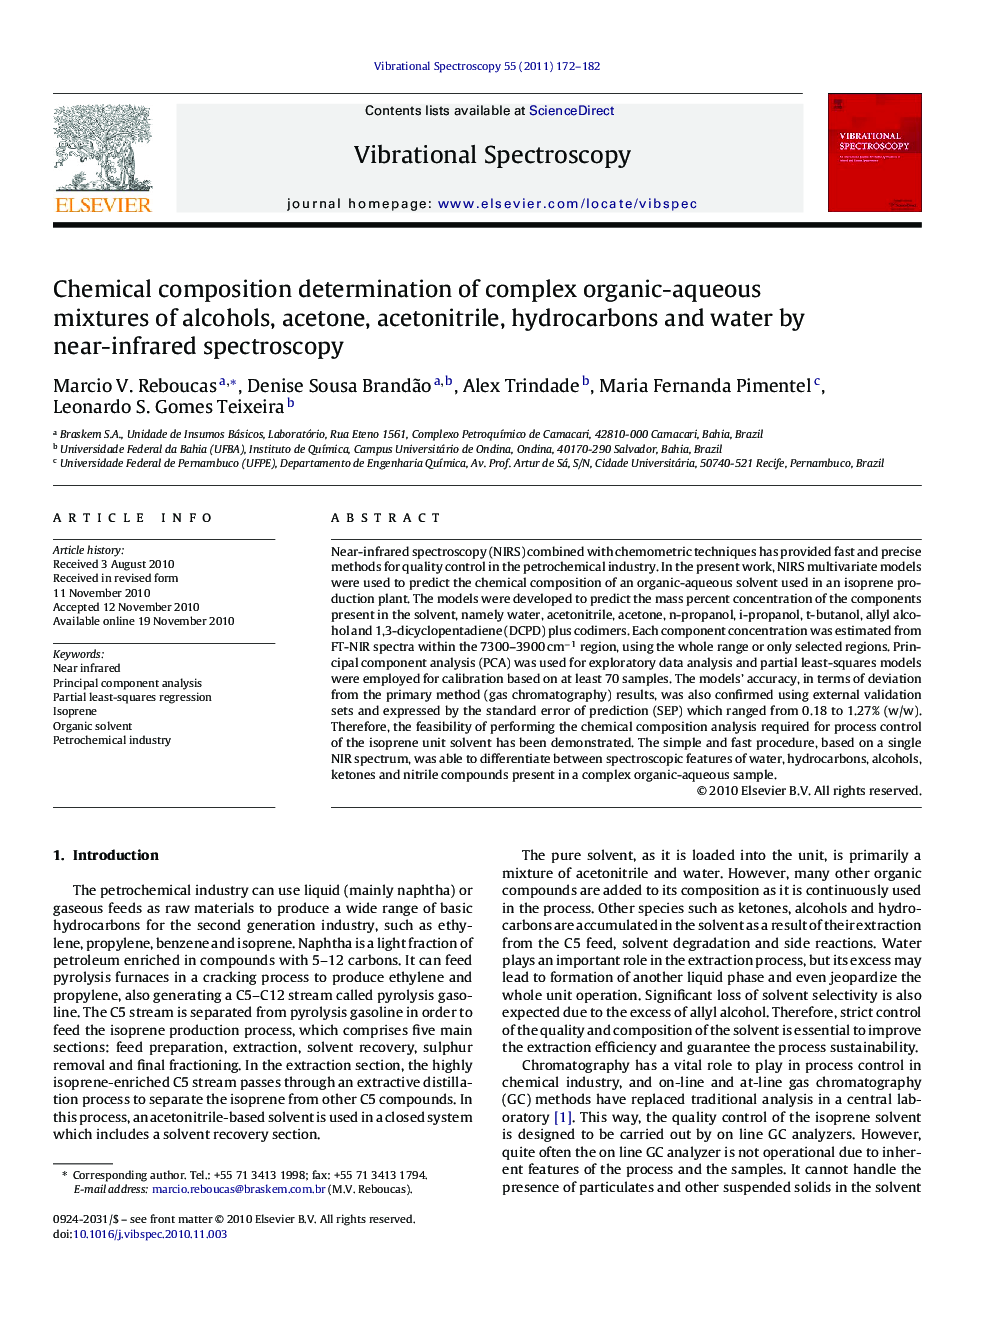 Chemical composition determination of complex organic-aqueous mixtures of alcohols, acetone, acetonitrile, hydrocarbons and water by near-infrared spectroscopy